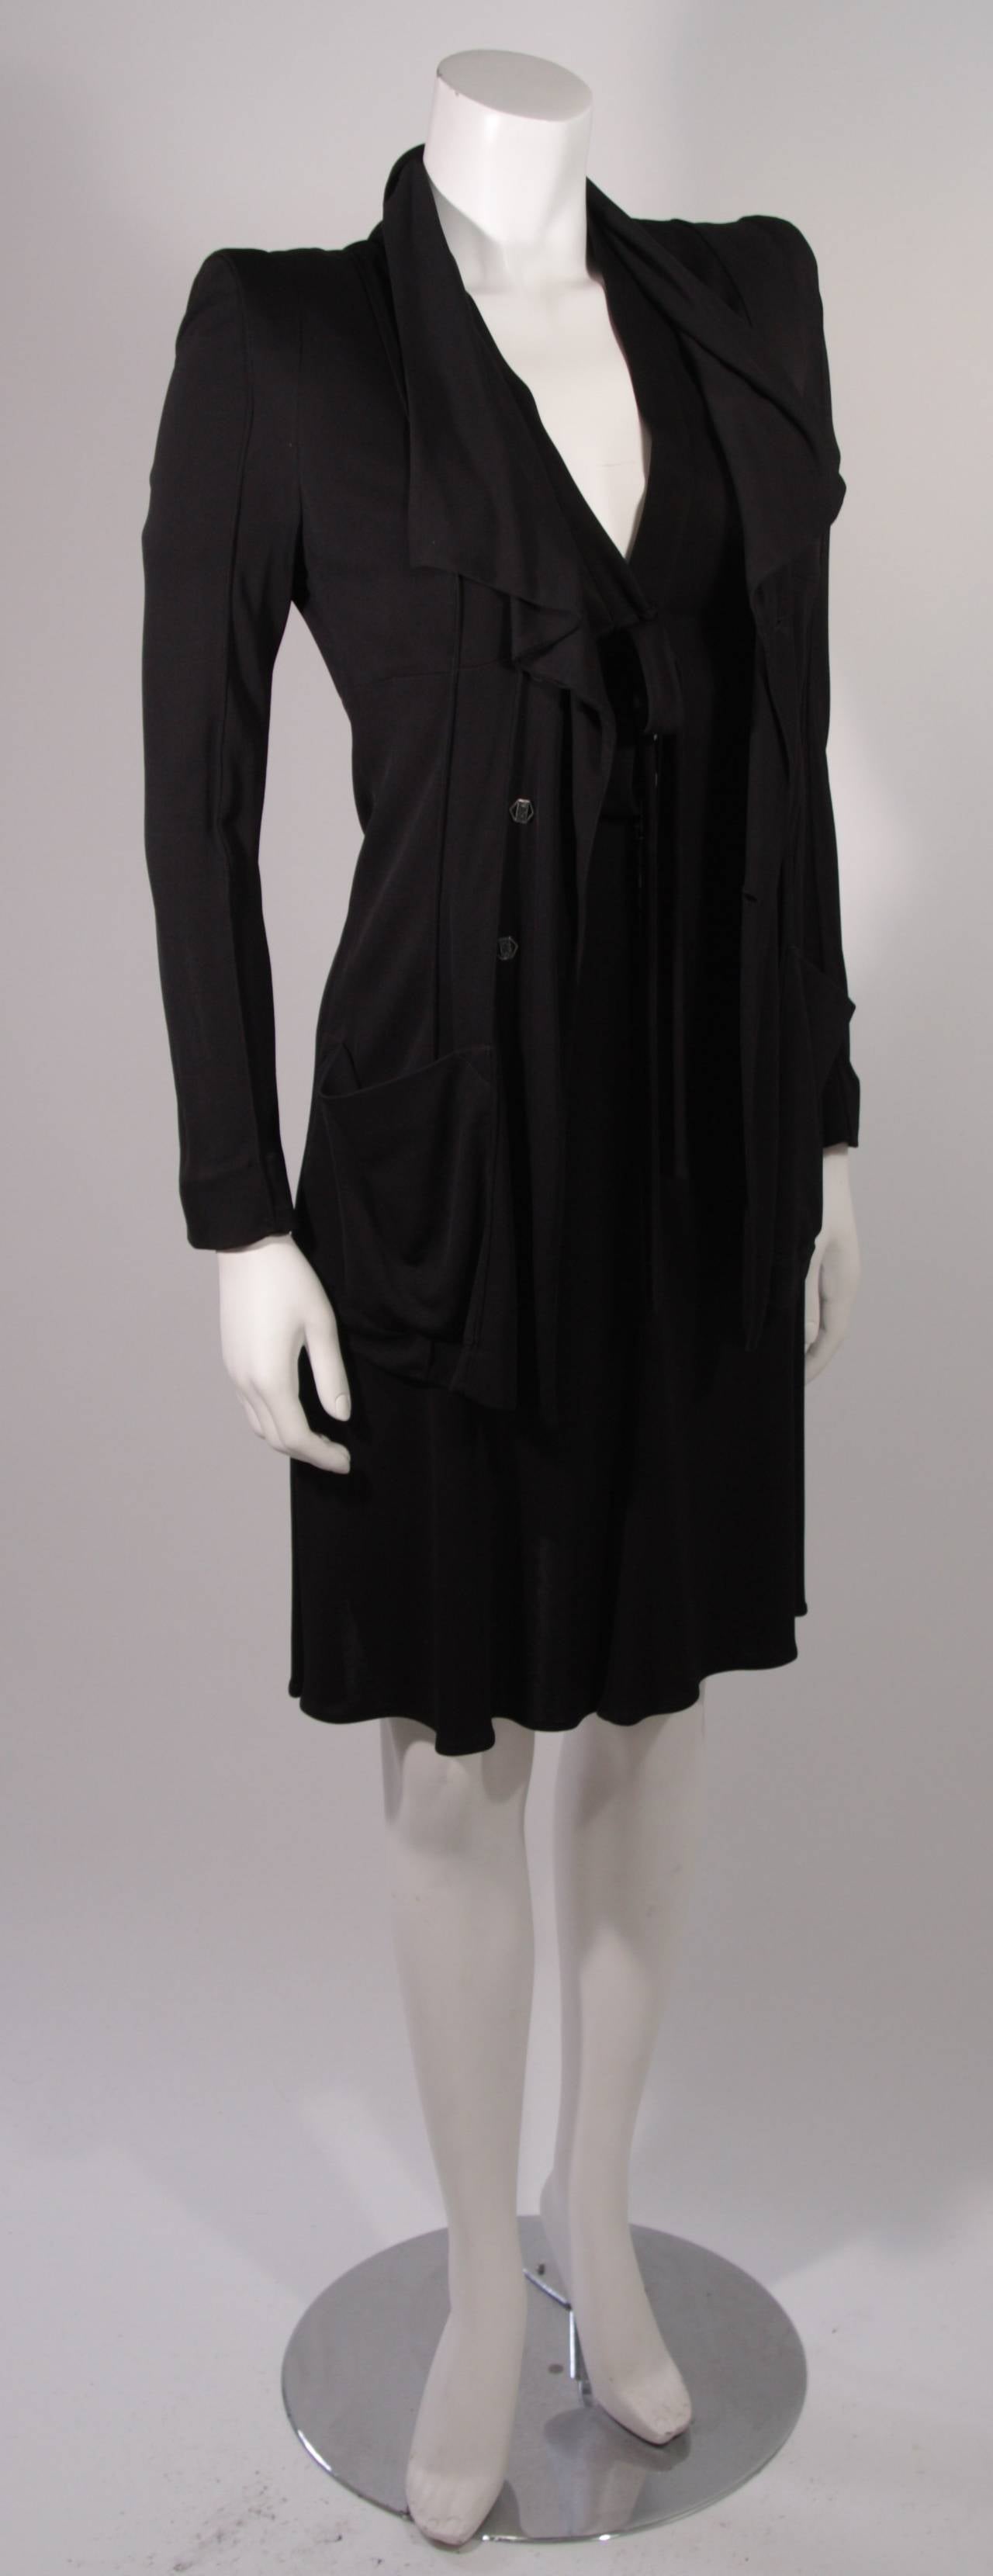 Lagerfield Black Jersey Dress and Jacket Ensemble Size 36 In Excellent Condition For Sale In Los Angeles, CA